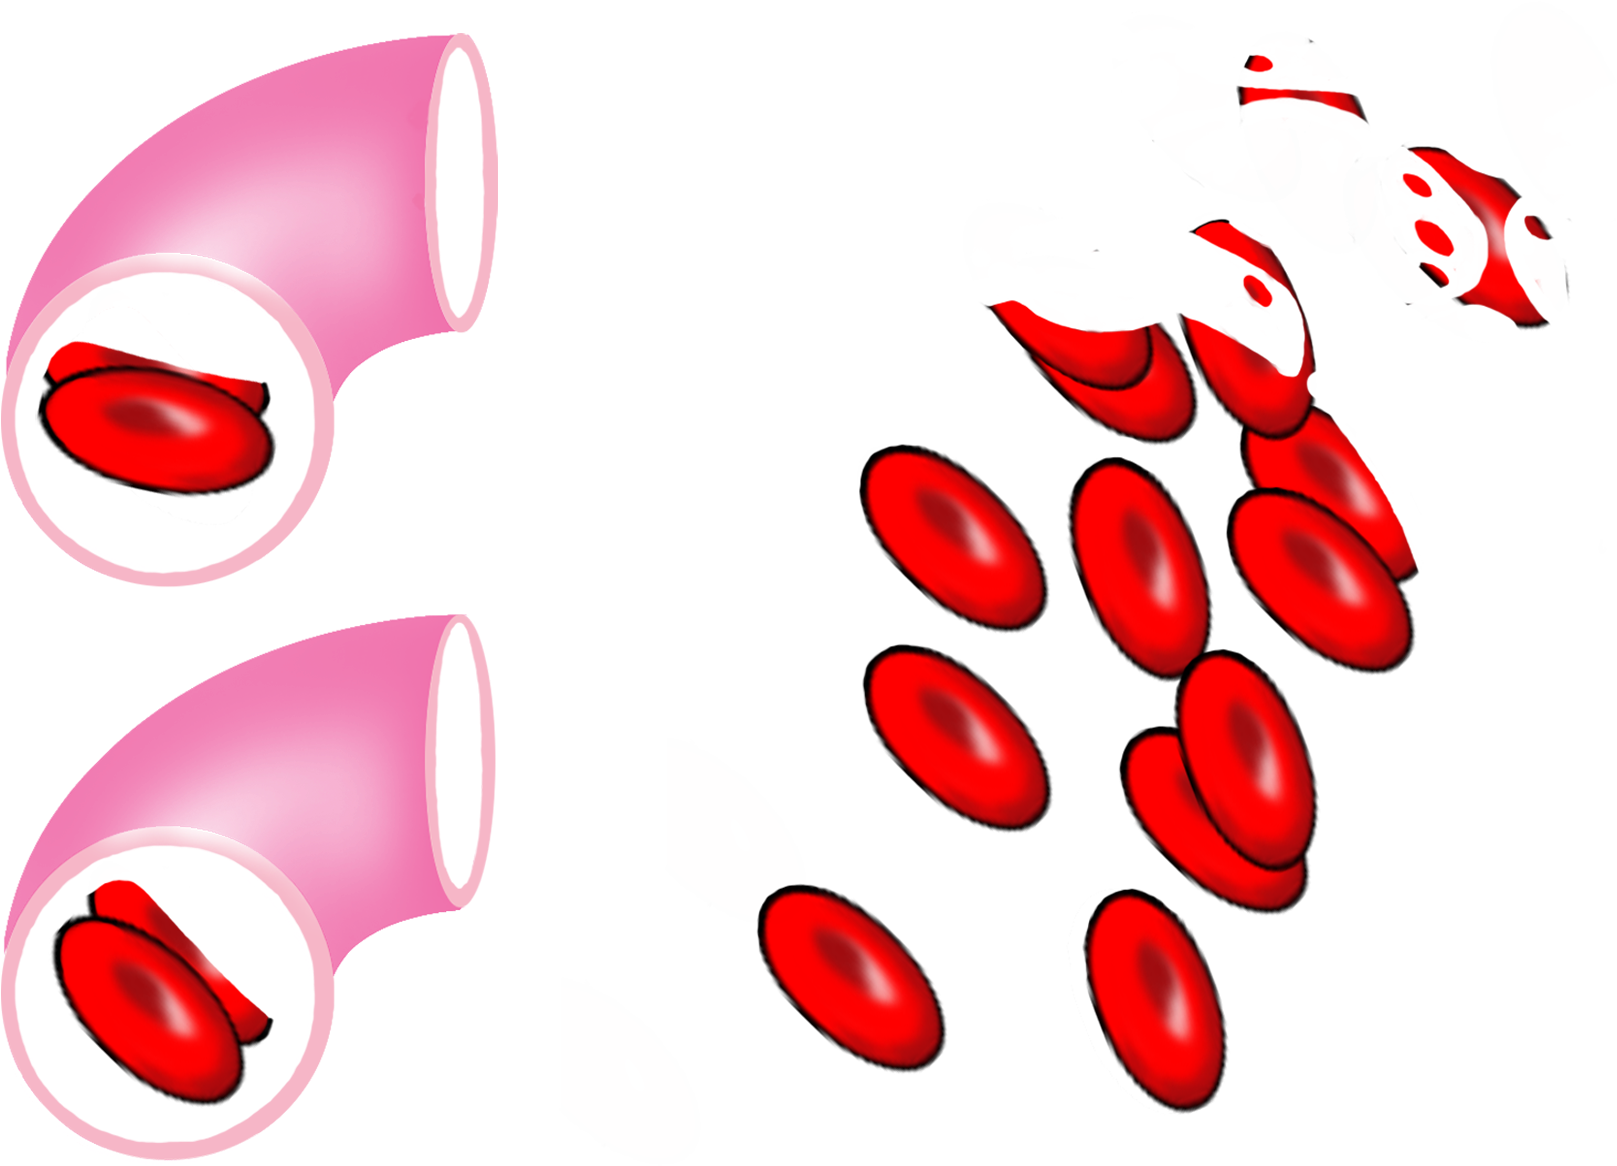 Red Blood Cells > - Red Blood Cells > (1920x1280)